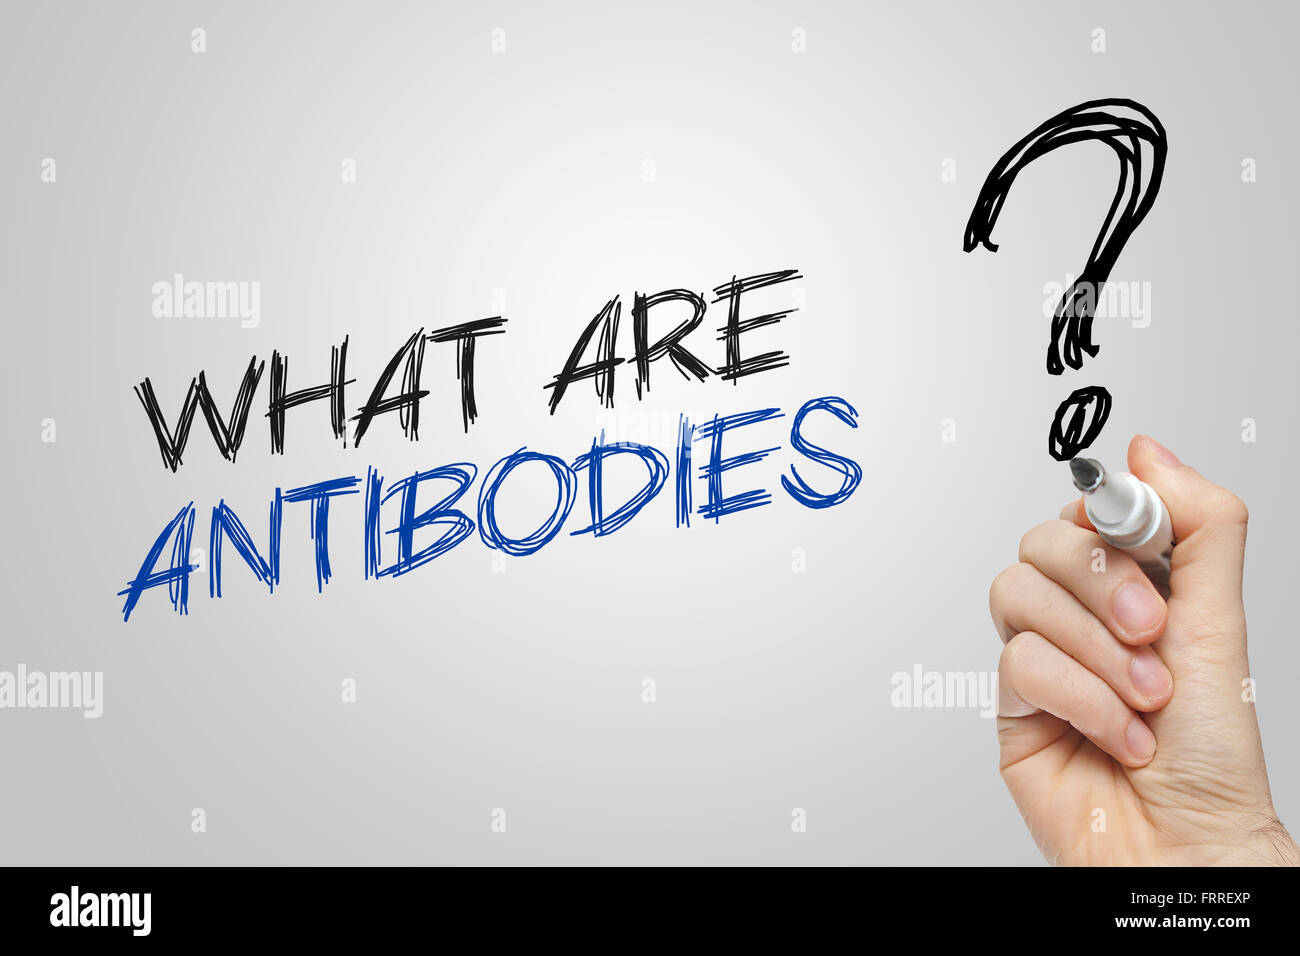 Hand writing what are antibodies on grey background Stock Photo